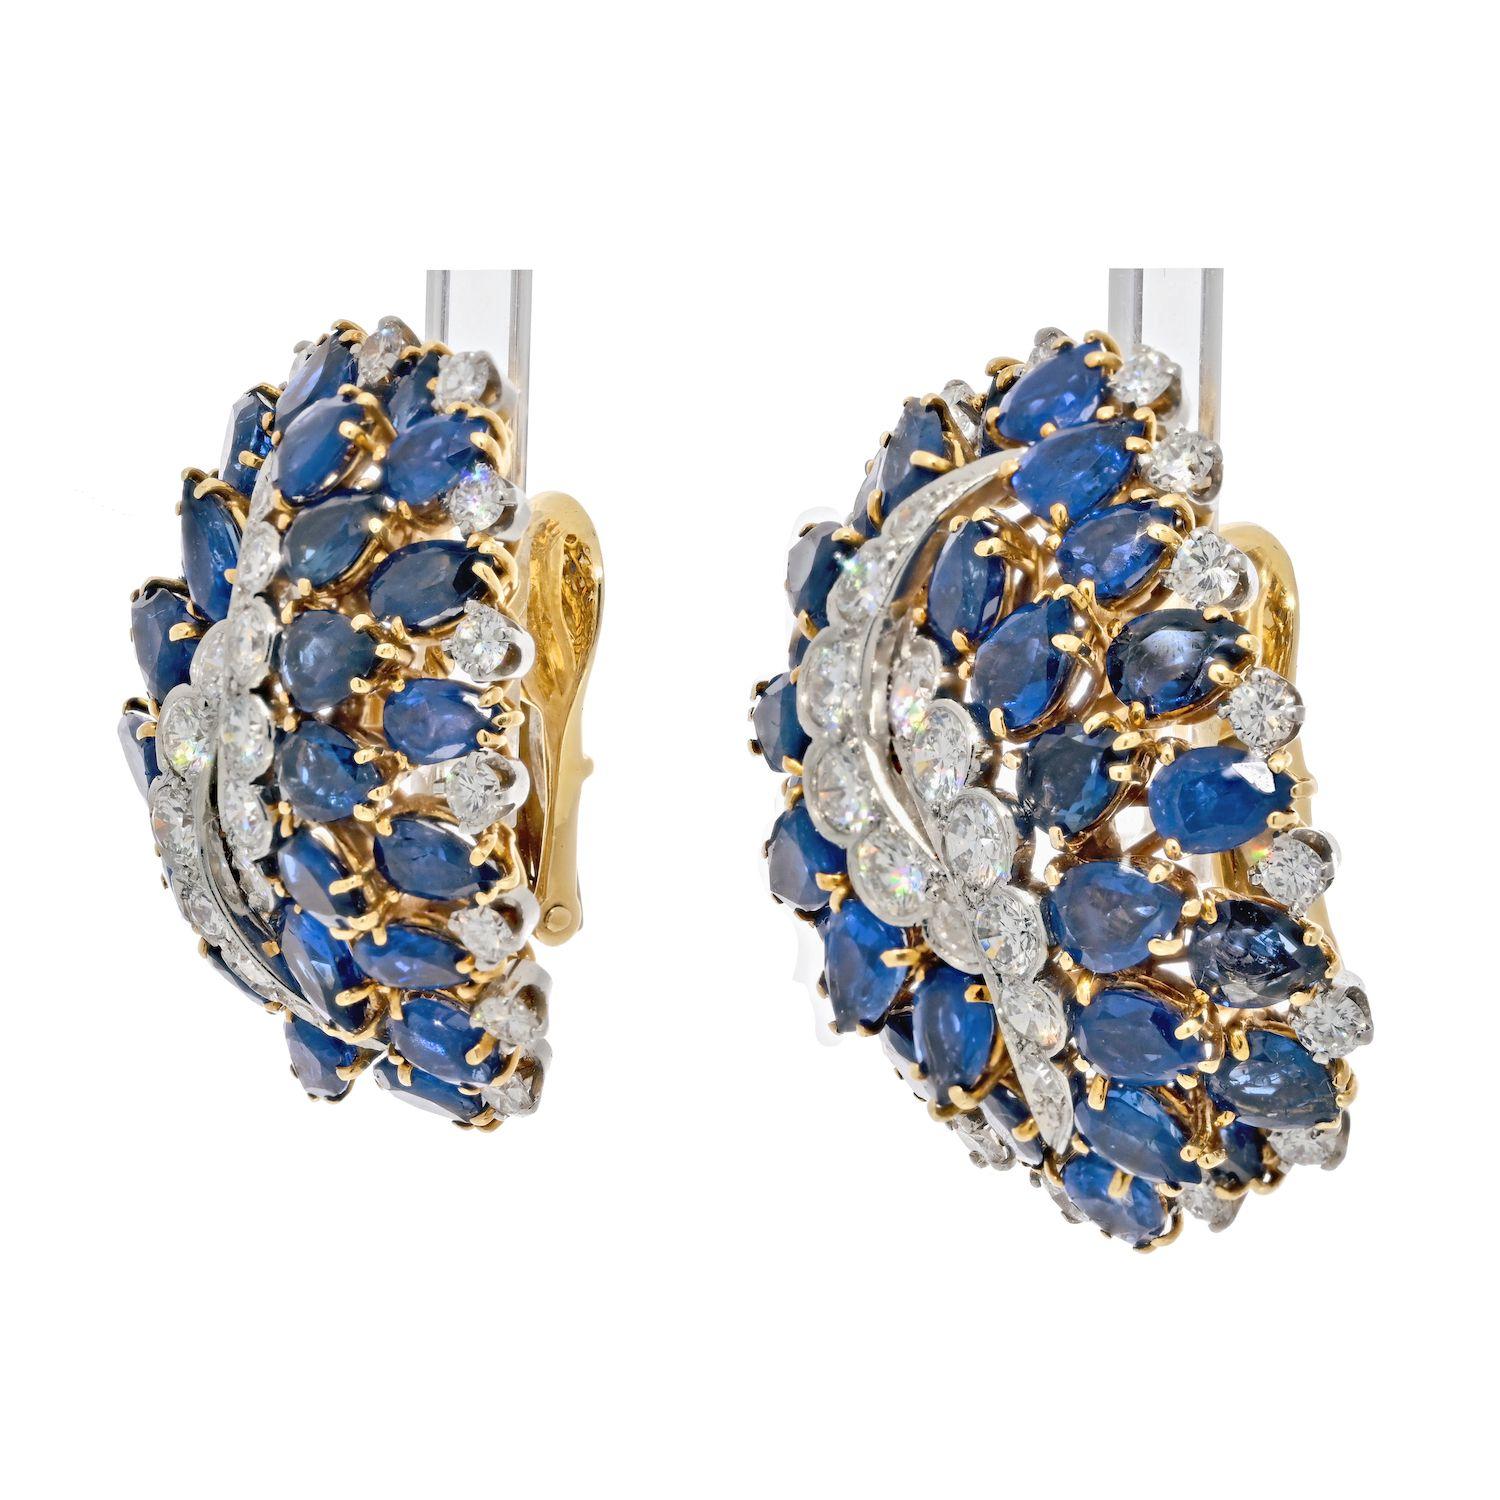 David Webb knows how to create exceptional jewelry with color stones, diamonds and enameling, and this pair of earrings is no exception. We would say it is more on a 